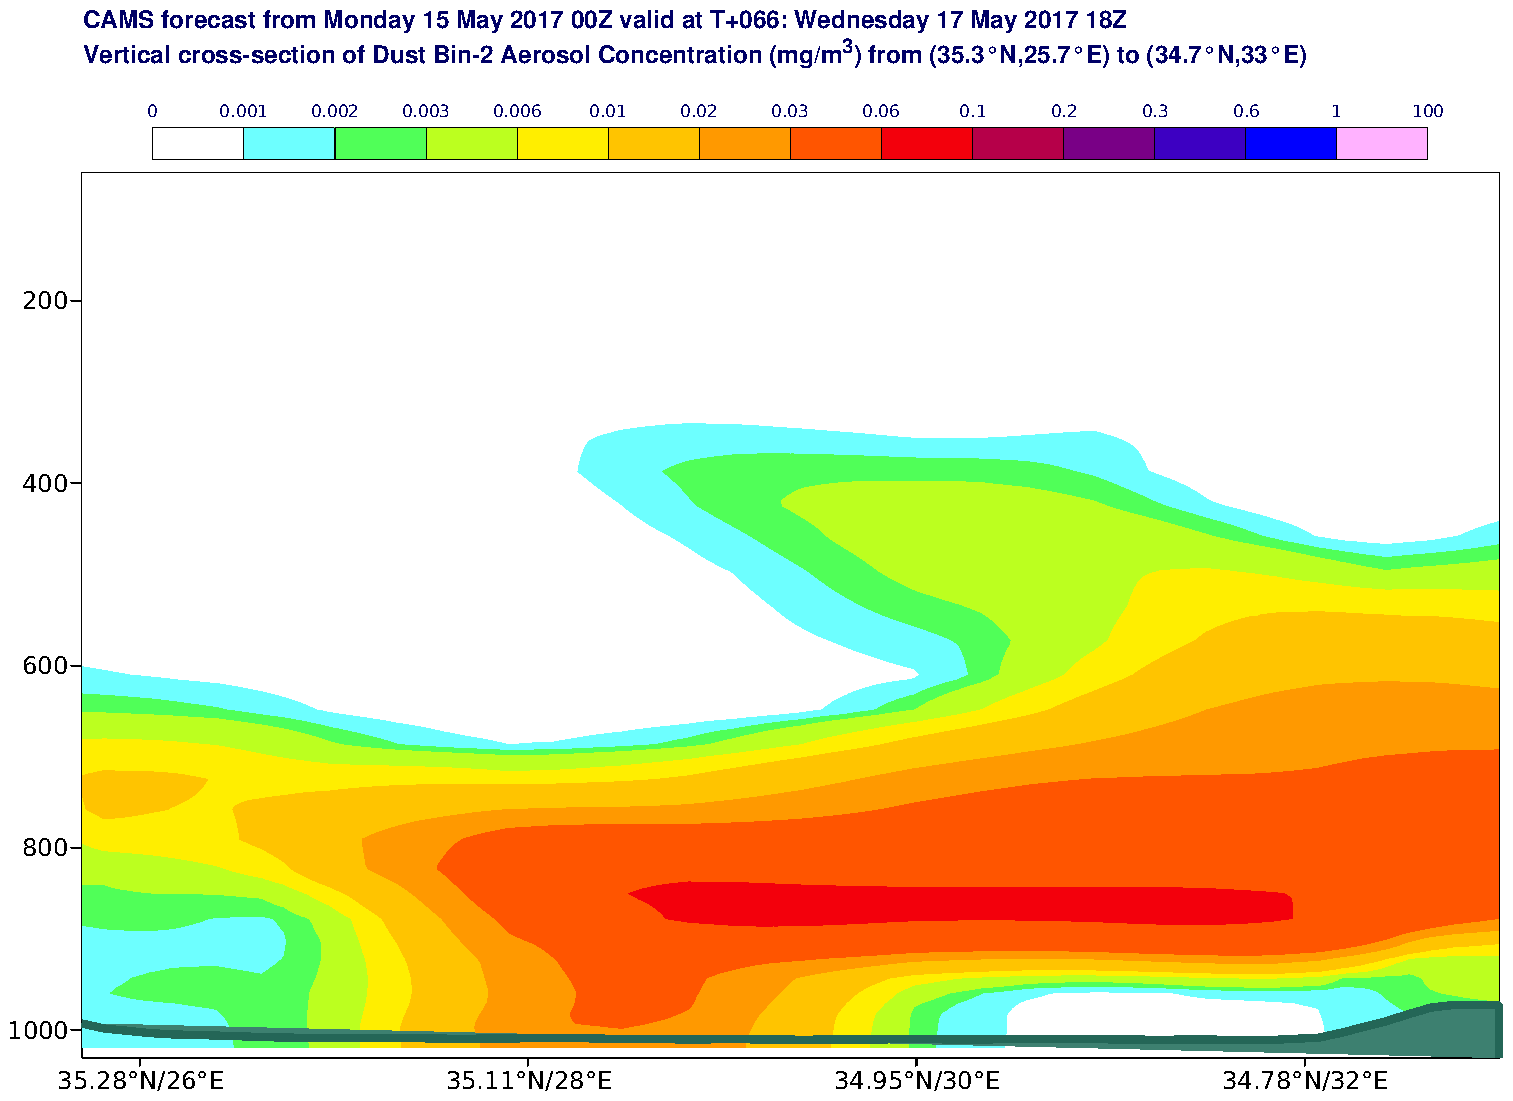 Vertical cross-section of Dust Bin-2 Aerosol Concentration (mg/m3) valid at T66 - 2017-05-17 18:00